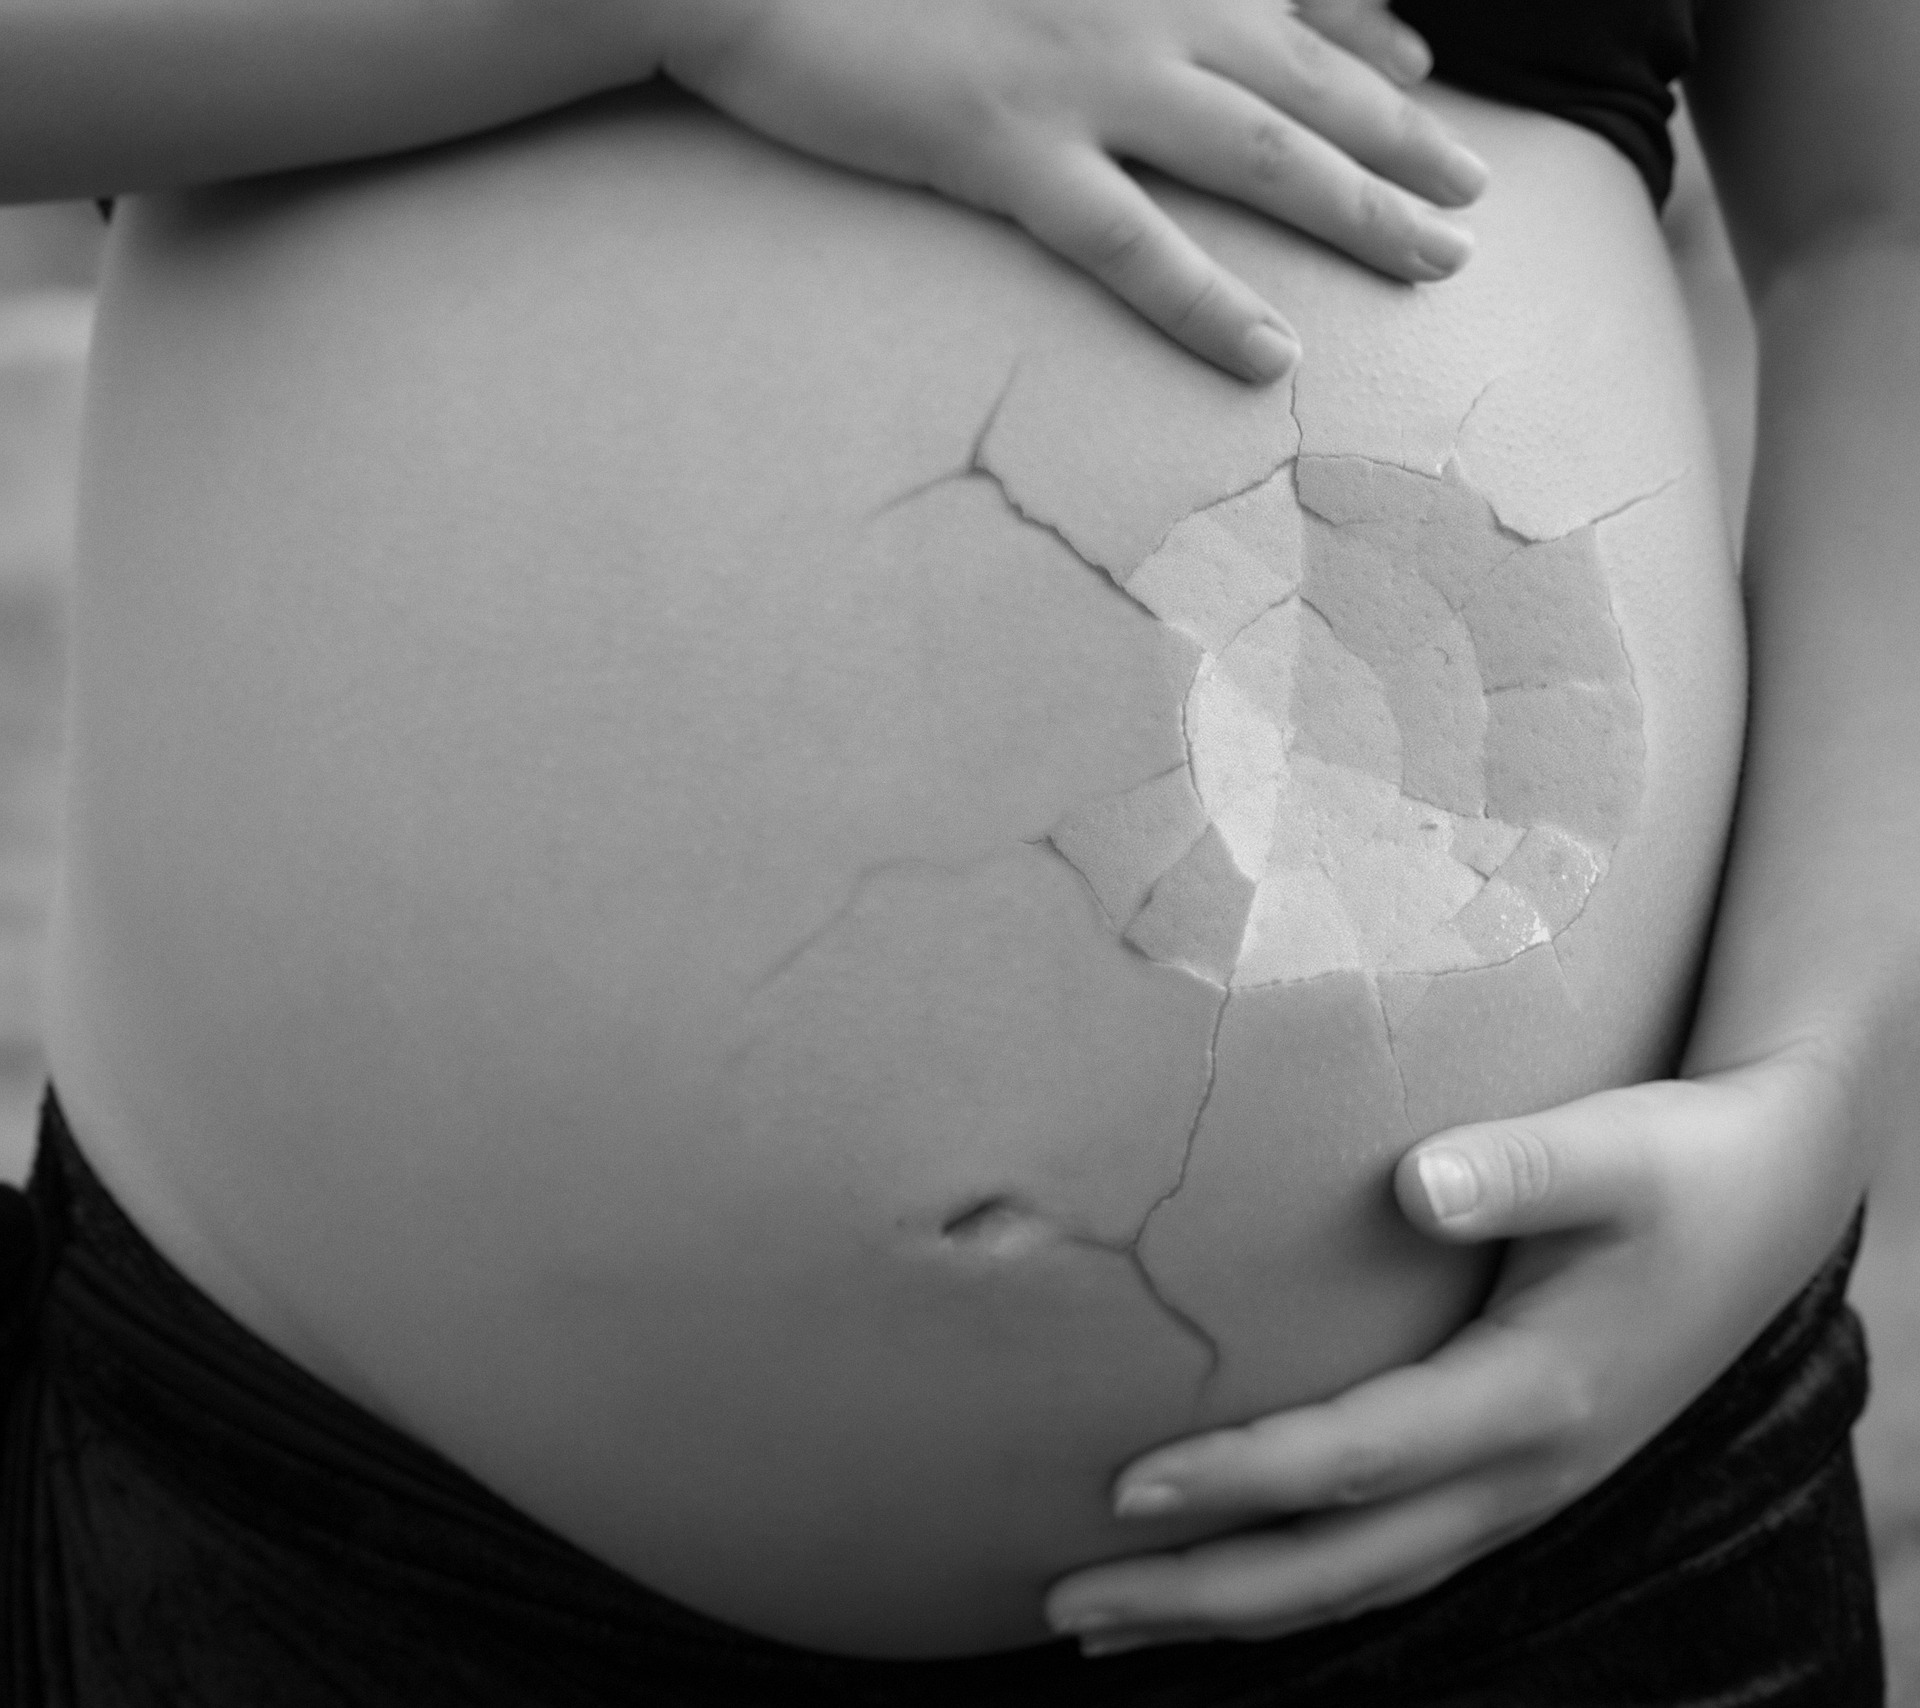 Stomach of Shattered Pregnant Women